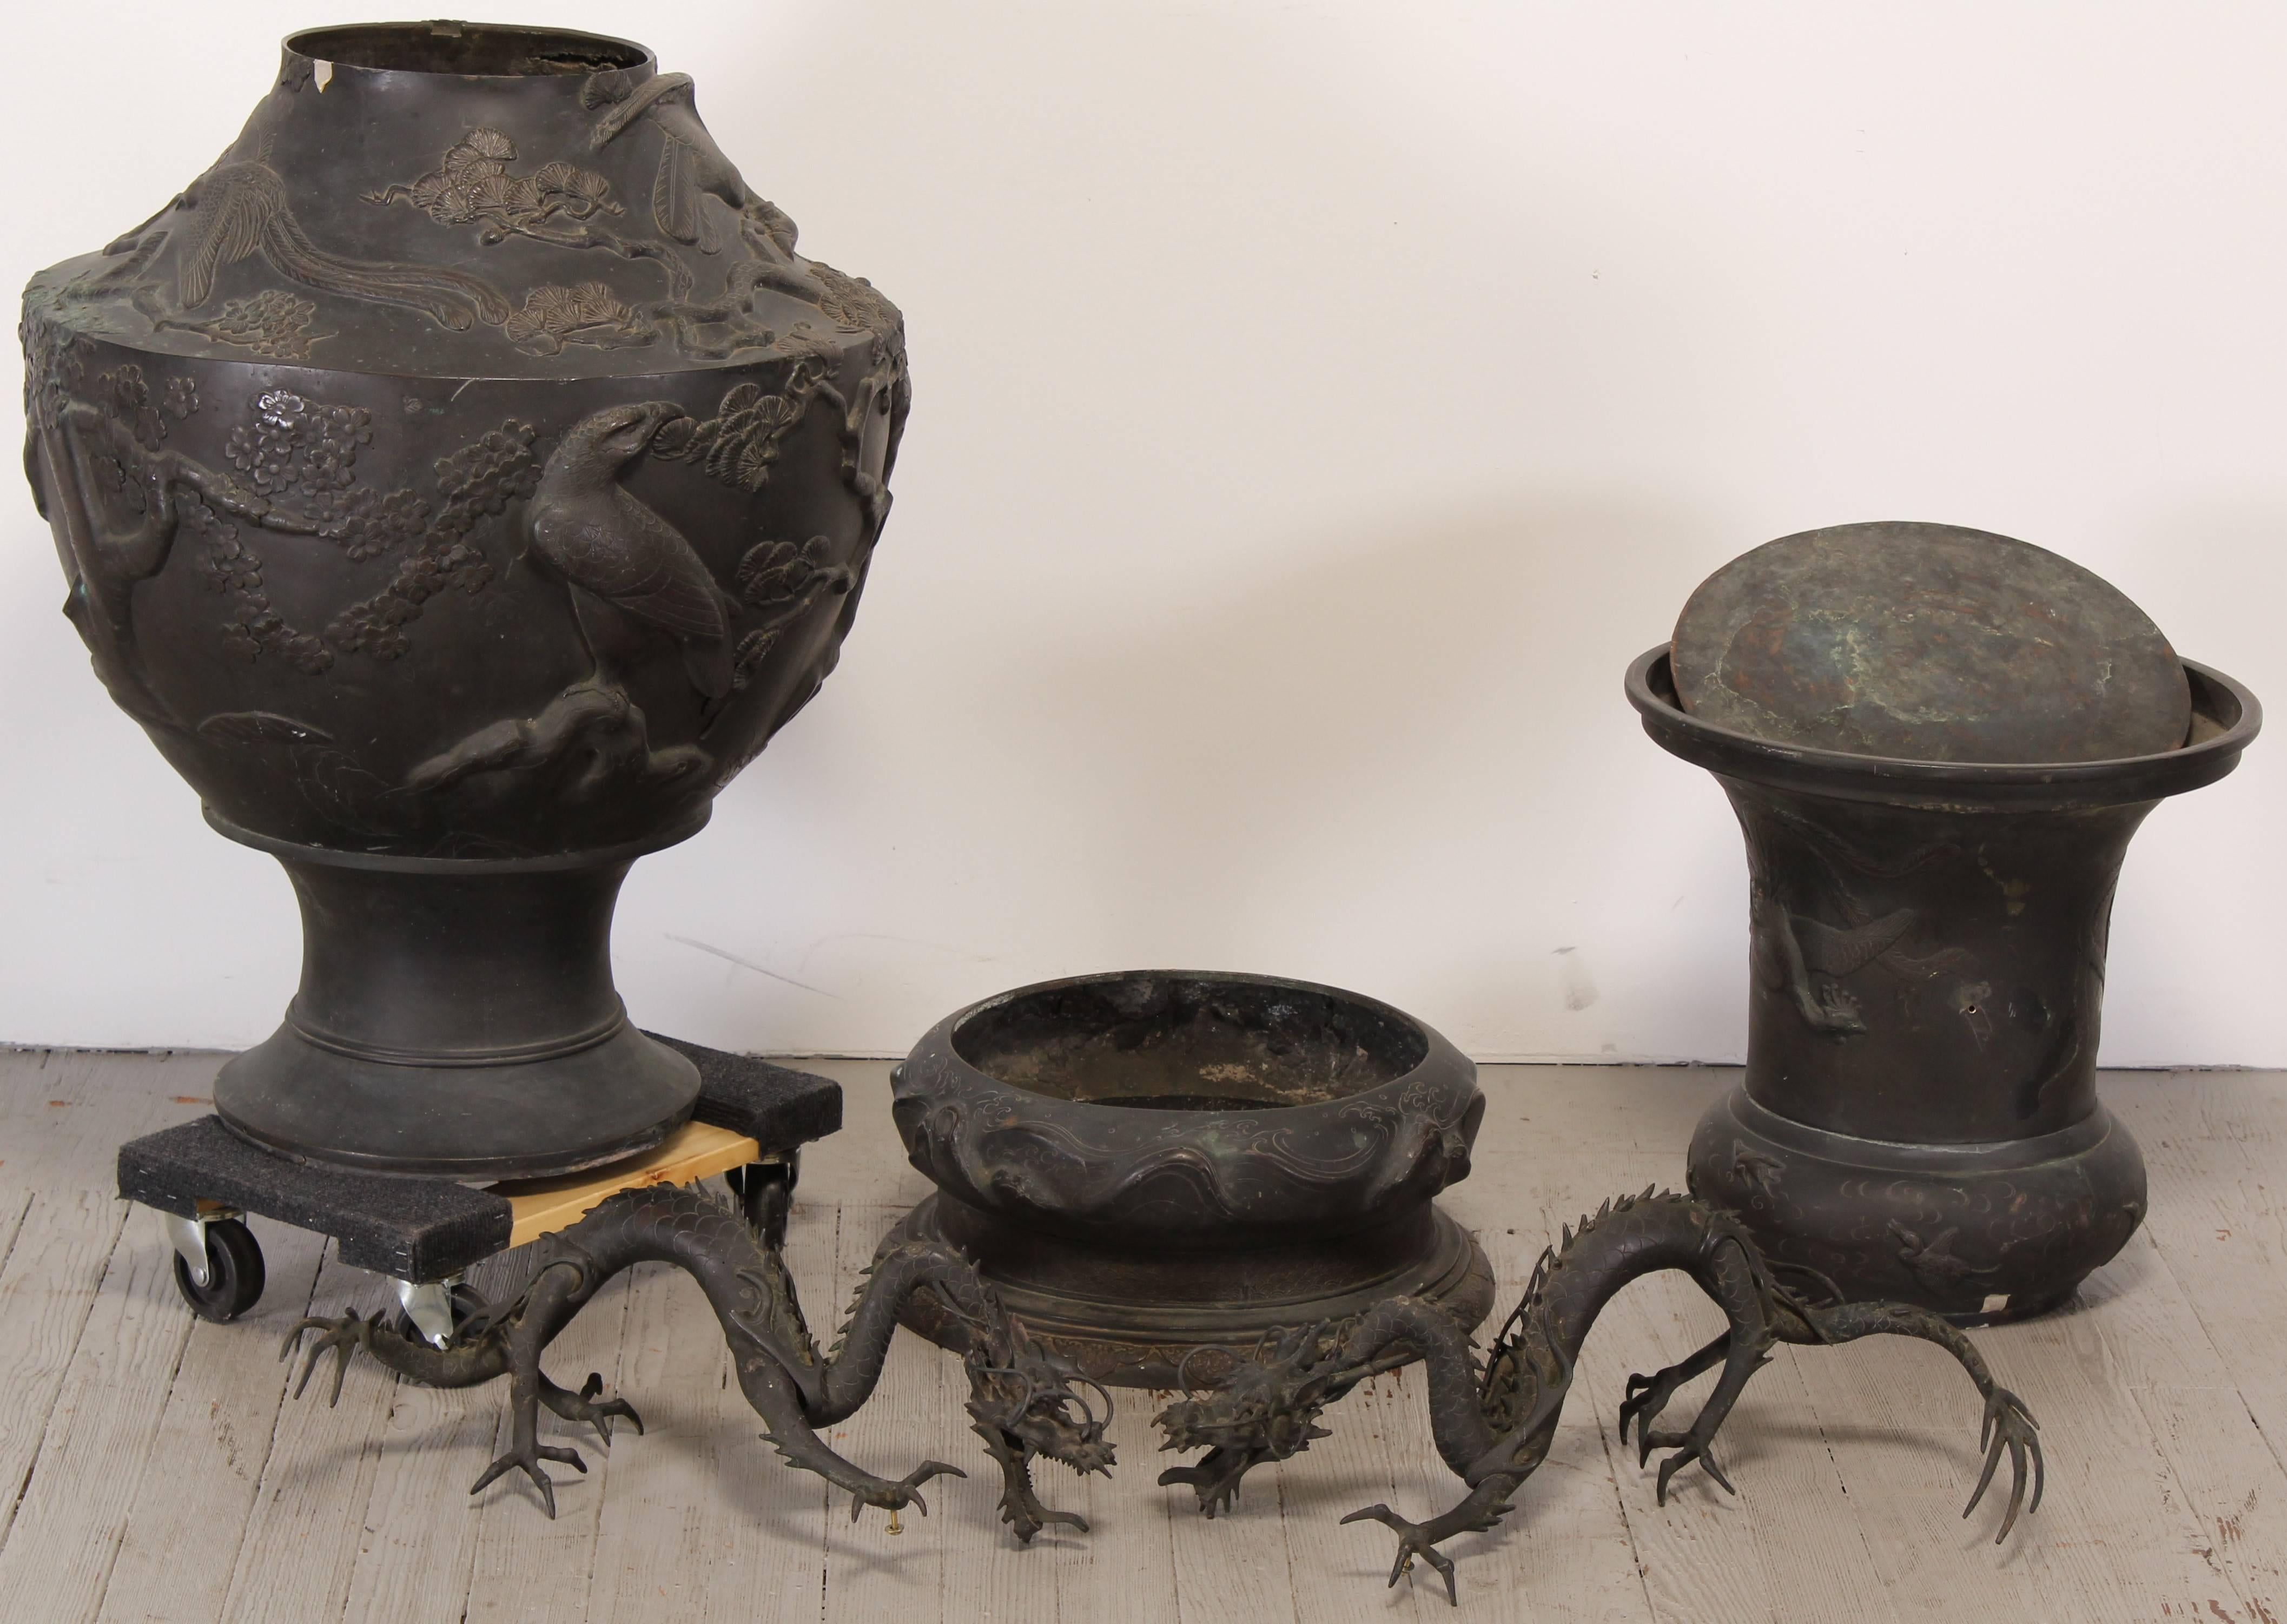 Japanese monumental bronze vase with two large dragon handles. Appears to be three different birds embossed on surface, peacock, eagle, cranes. Dates from the Meiji period. There have been recent repairs to the pins which attach the dragons to the